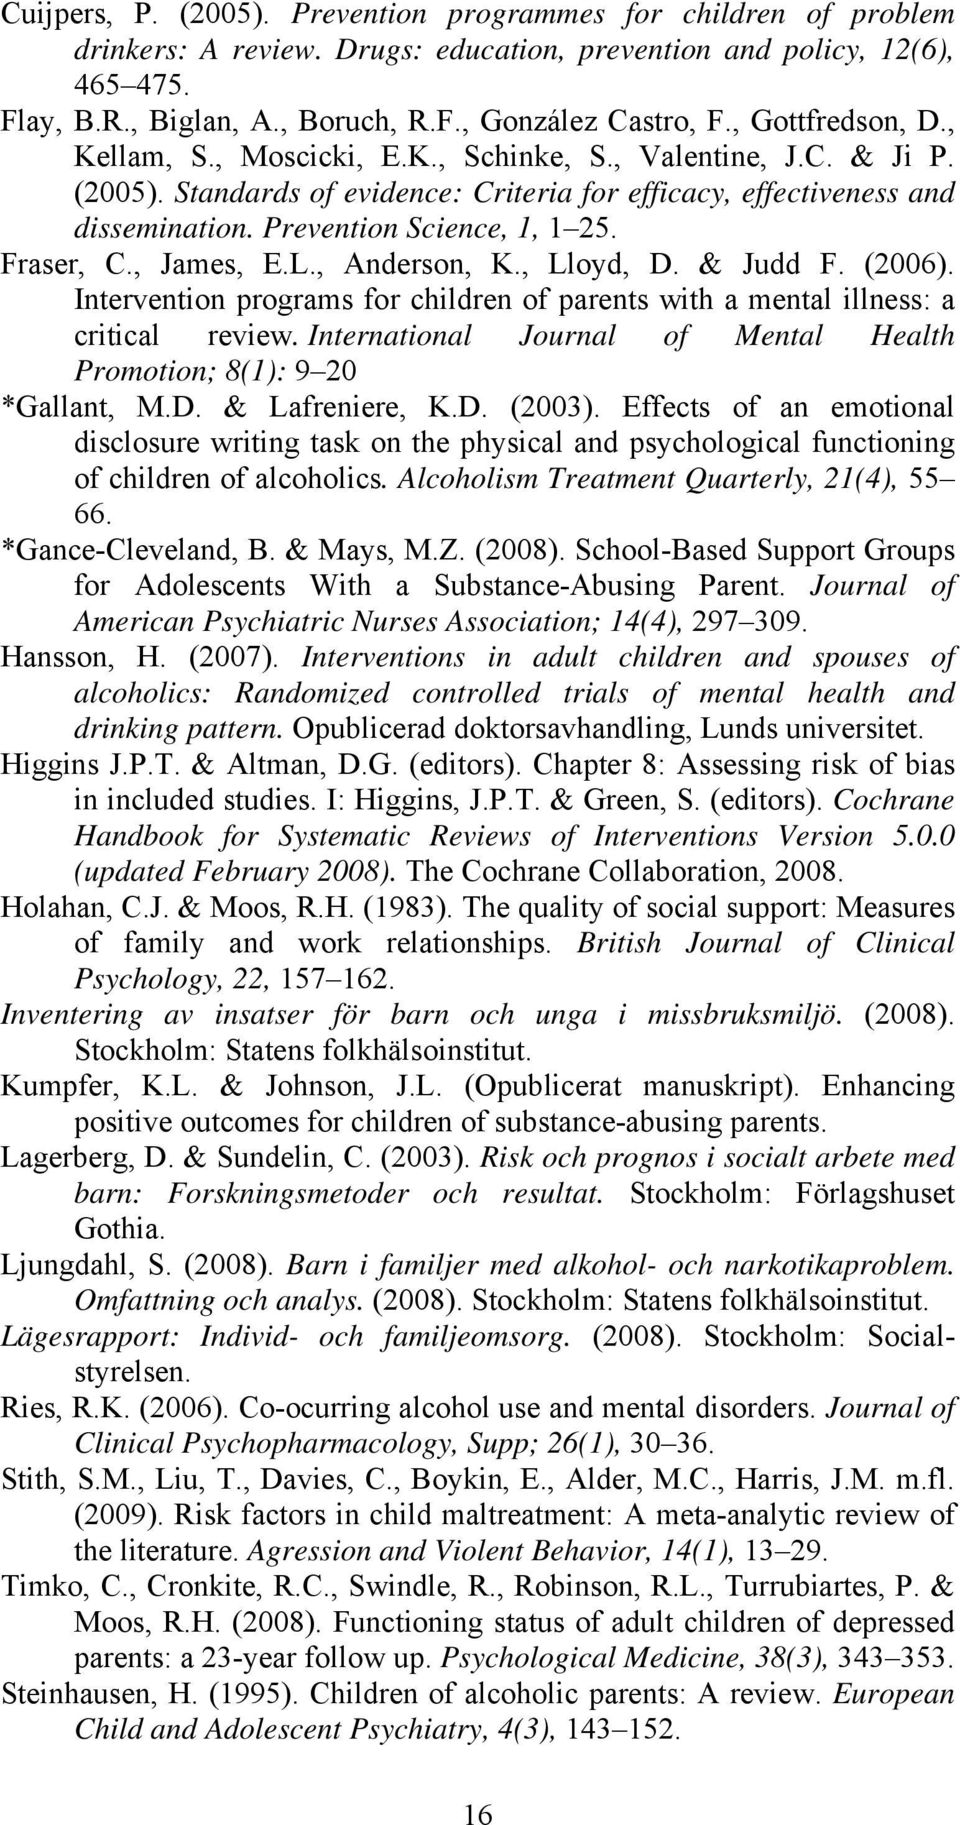 Fraser, C., James, E.L., Anderson, K., Lloyd, D. & Judd F. (2006). Intervention programs for children of parents with a mental illness: a critical review.